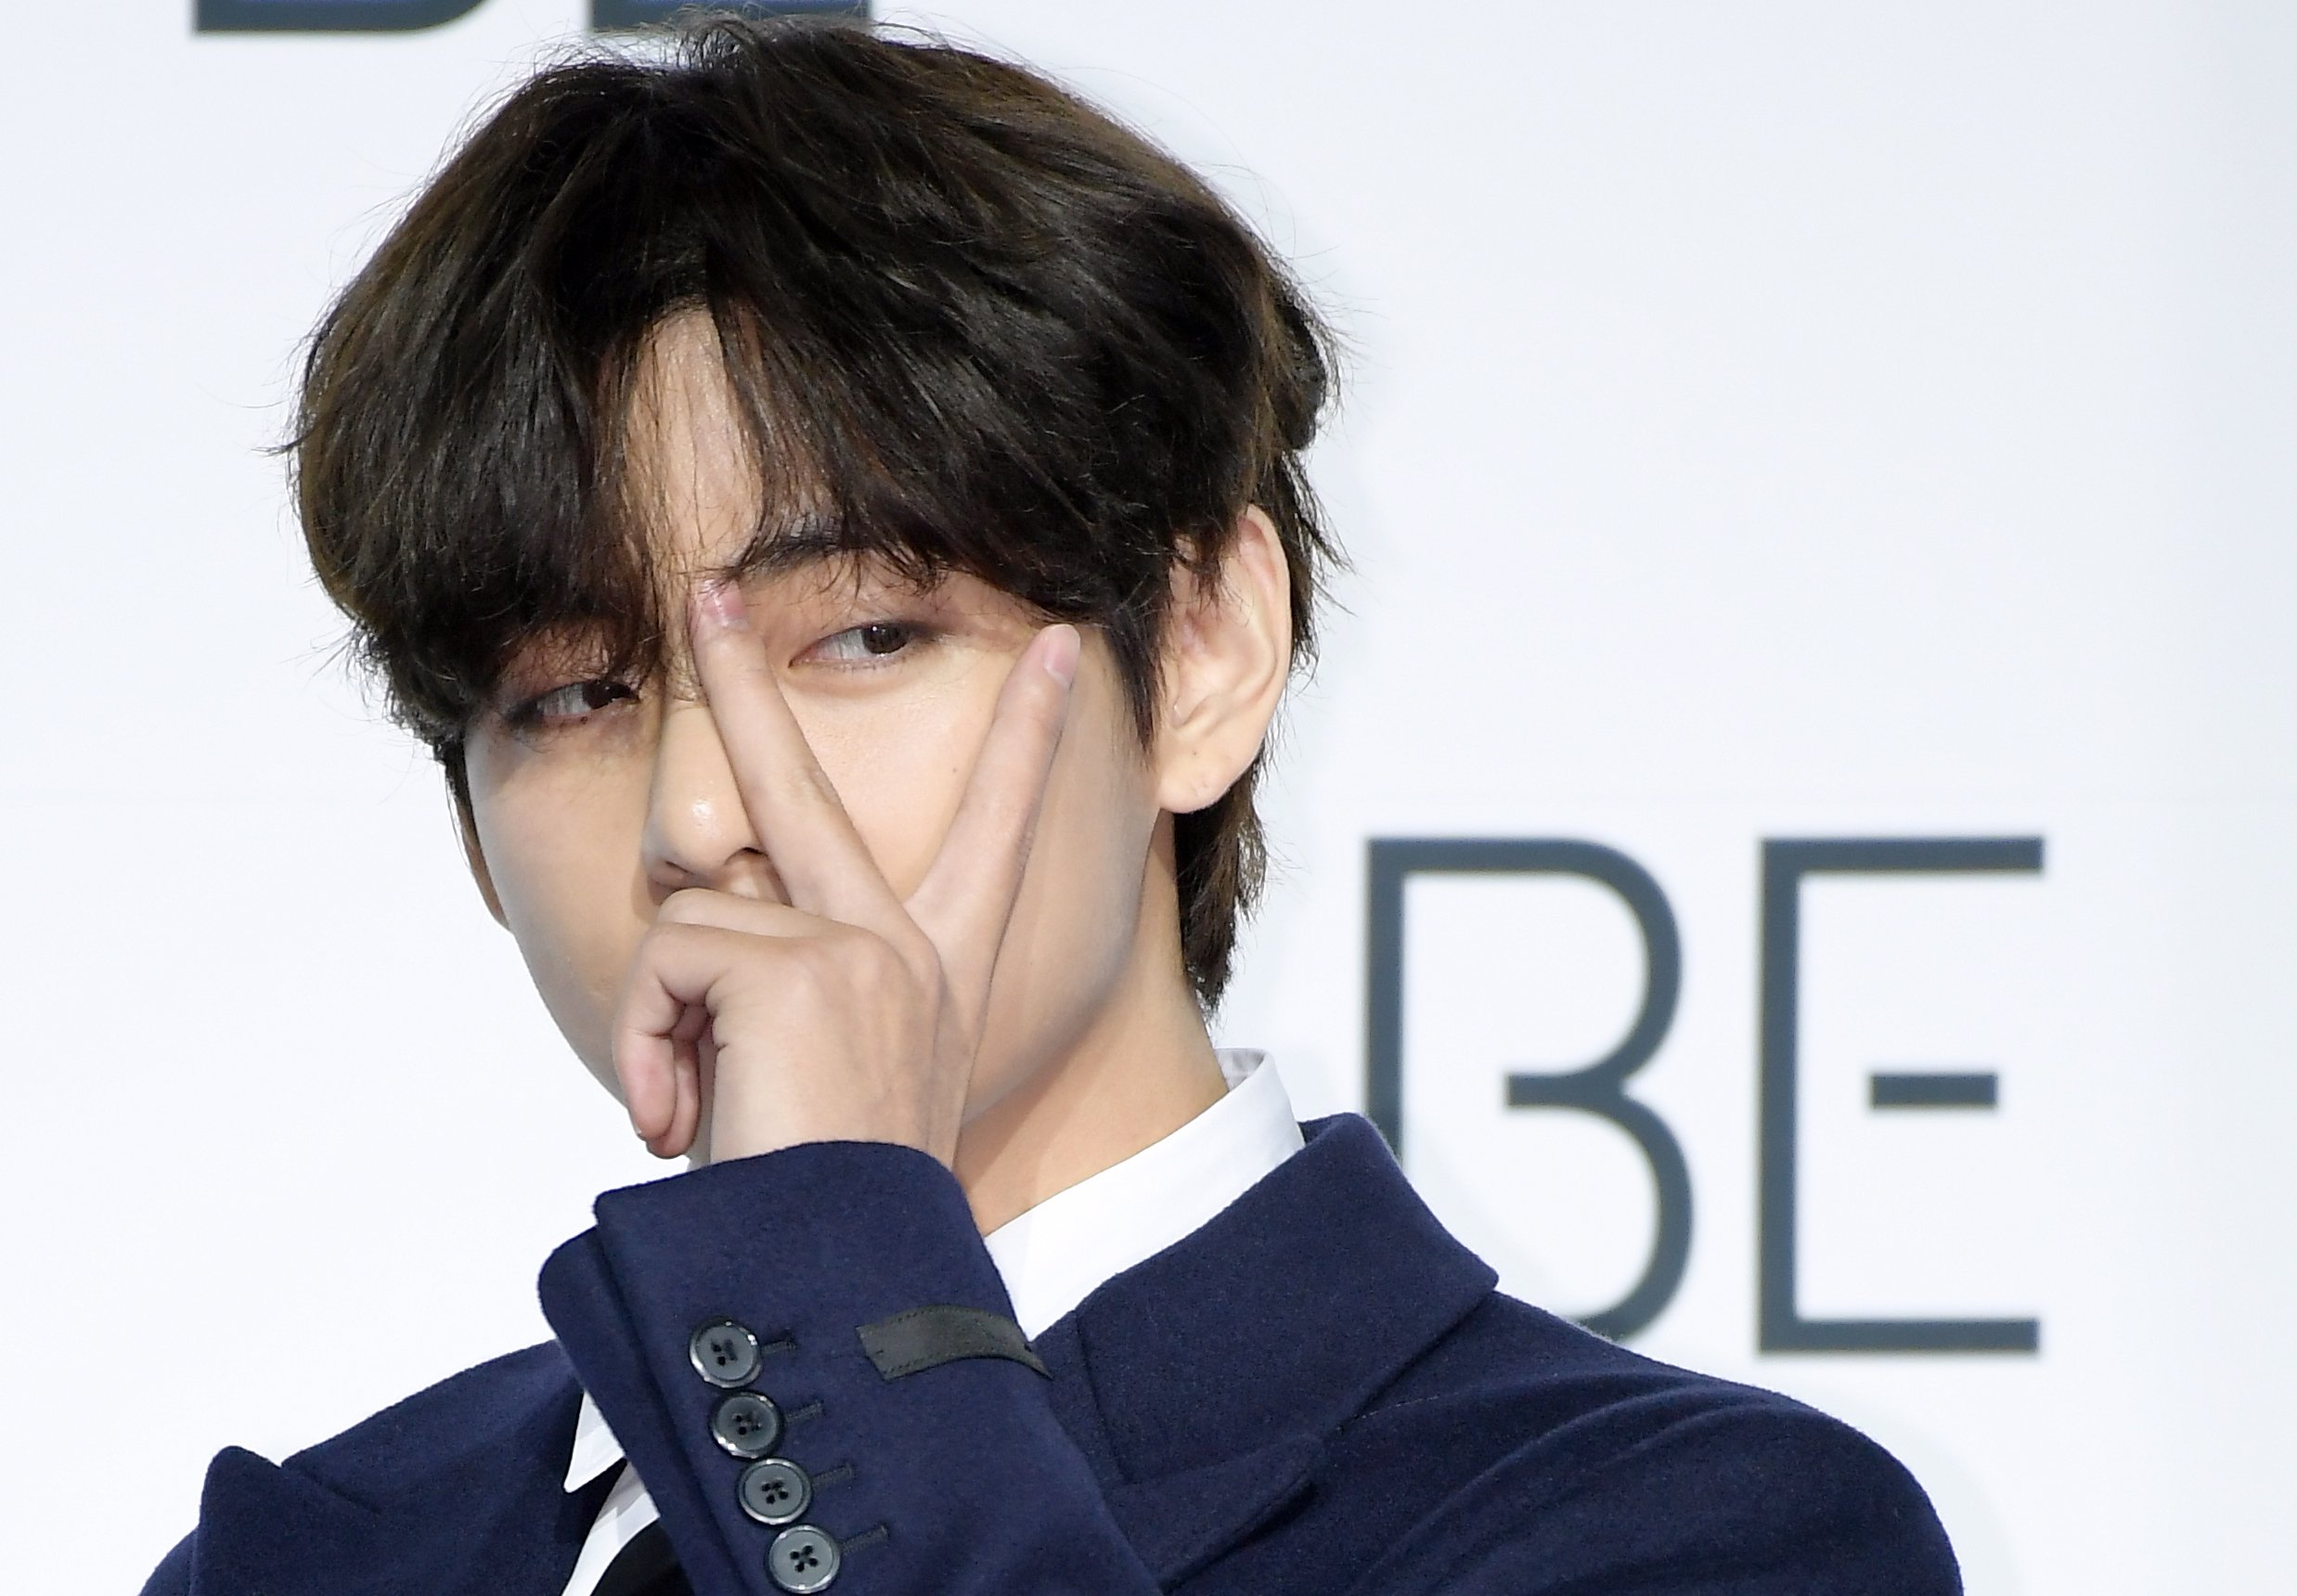 V of BTS holds up the peace sign at BTS' press conference for their album 'BE'